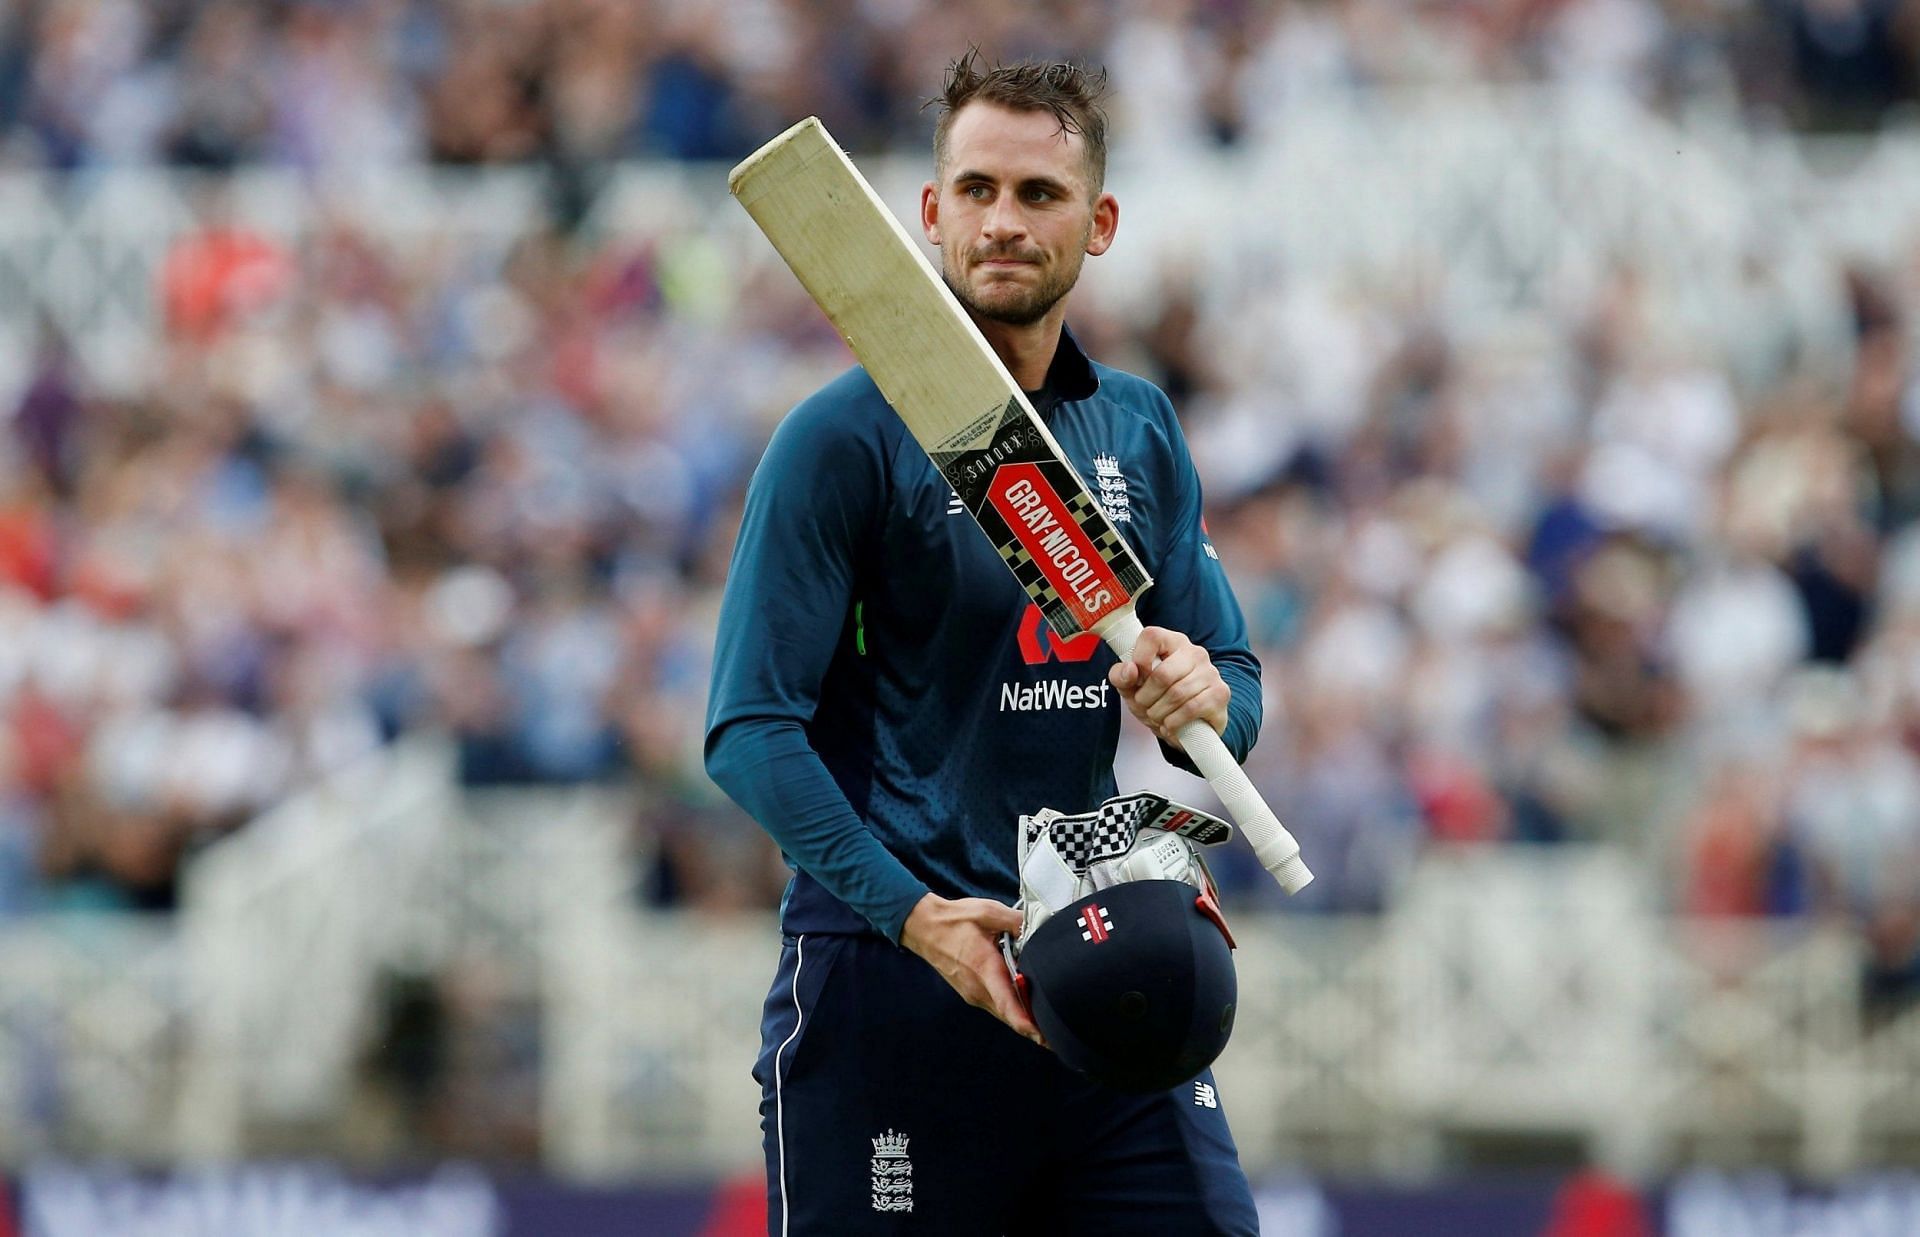 Two years after his 171, Hales lit up Trent Bridge once again, this time against the old enemy